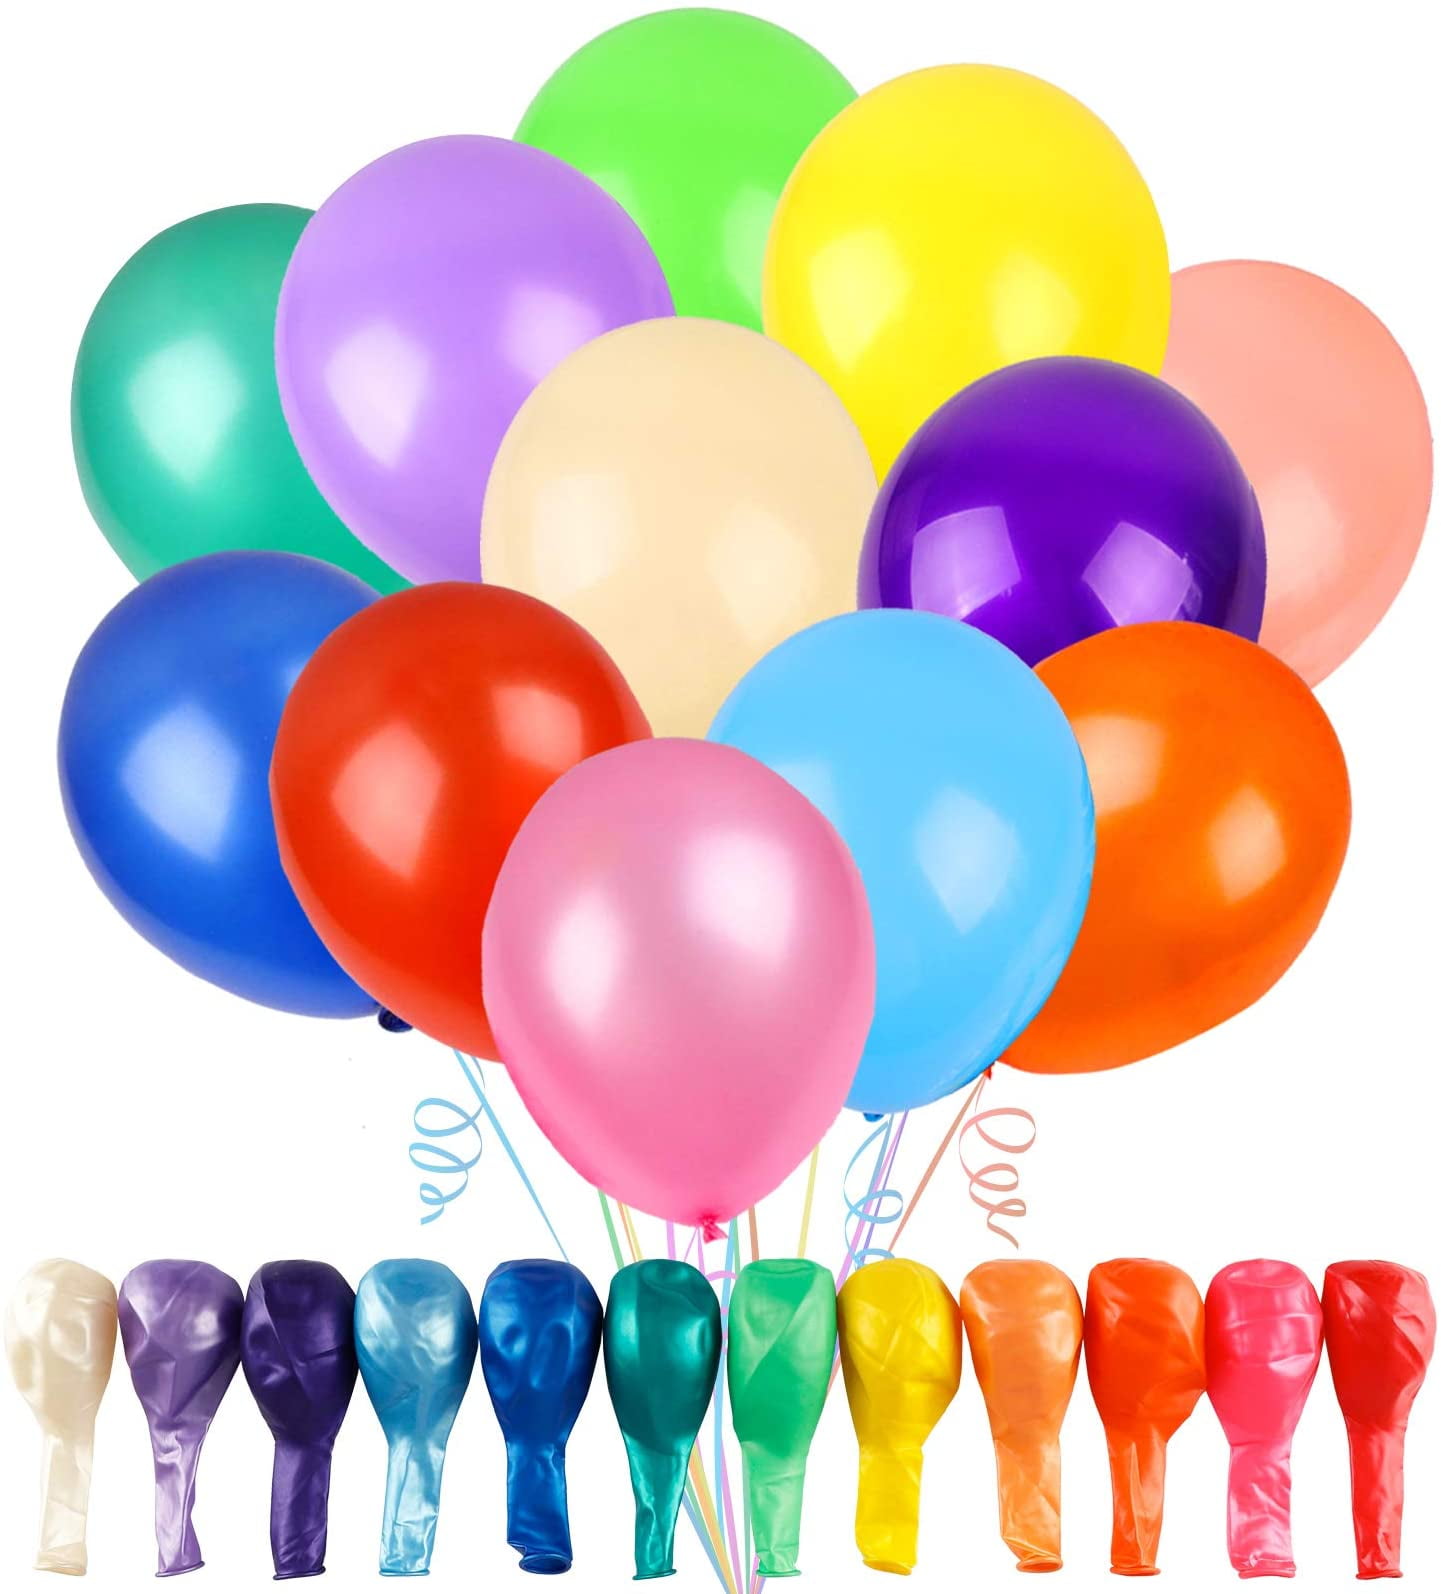 Green Paw Party Balloons Assorted 12 Inch Latex Multicoloured Packs of 25 50 100 Premium Quality Bright Metallic Balloons Suitable for Birthday Parties Weddings Anniversaries and Celebrations 